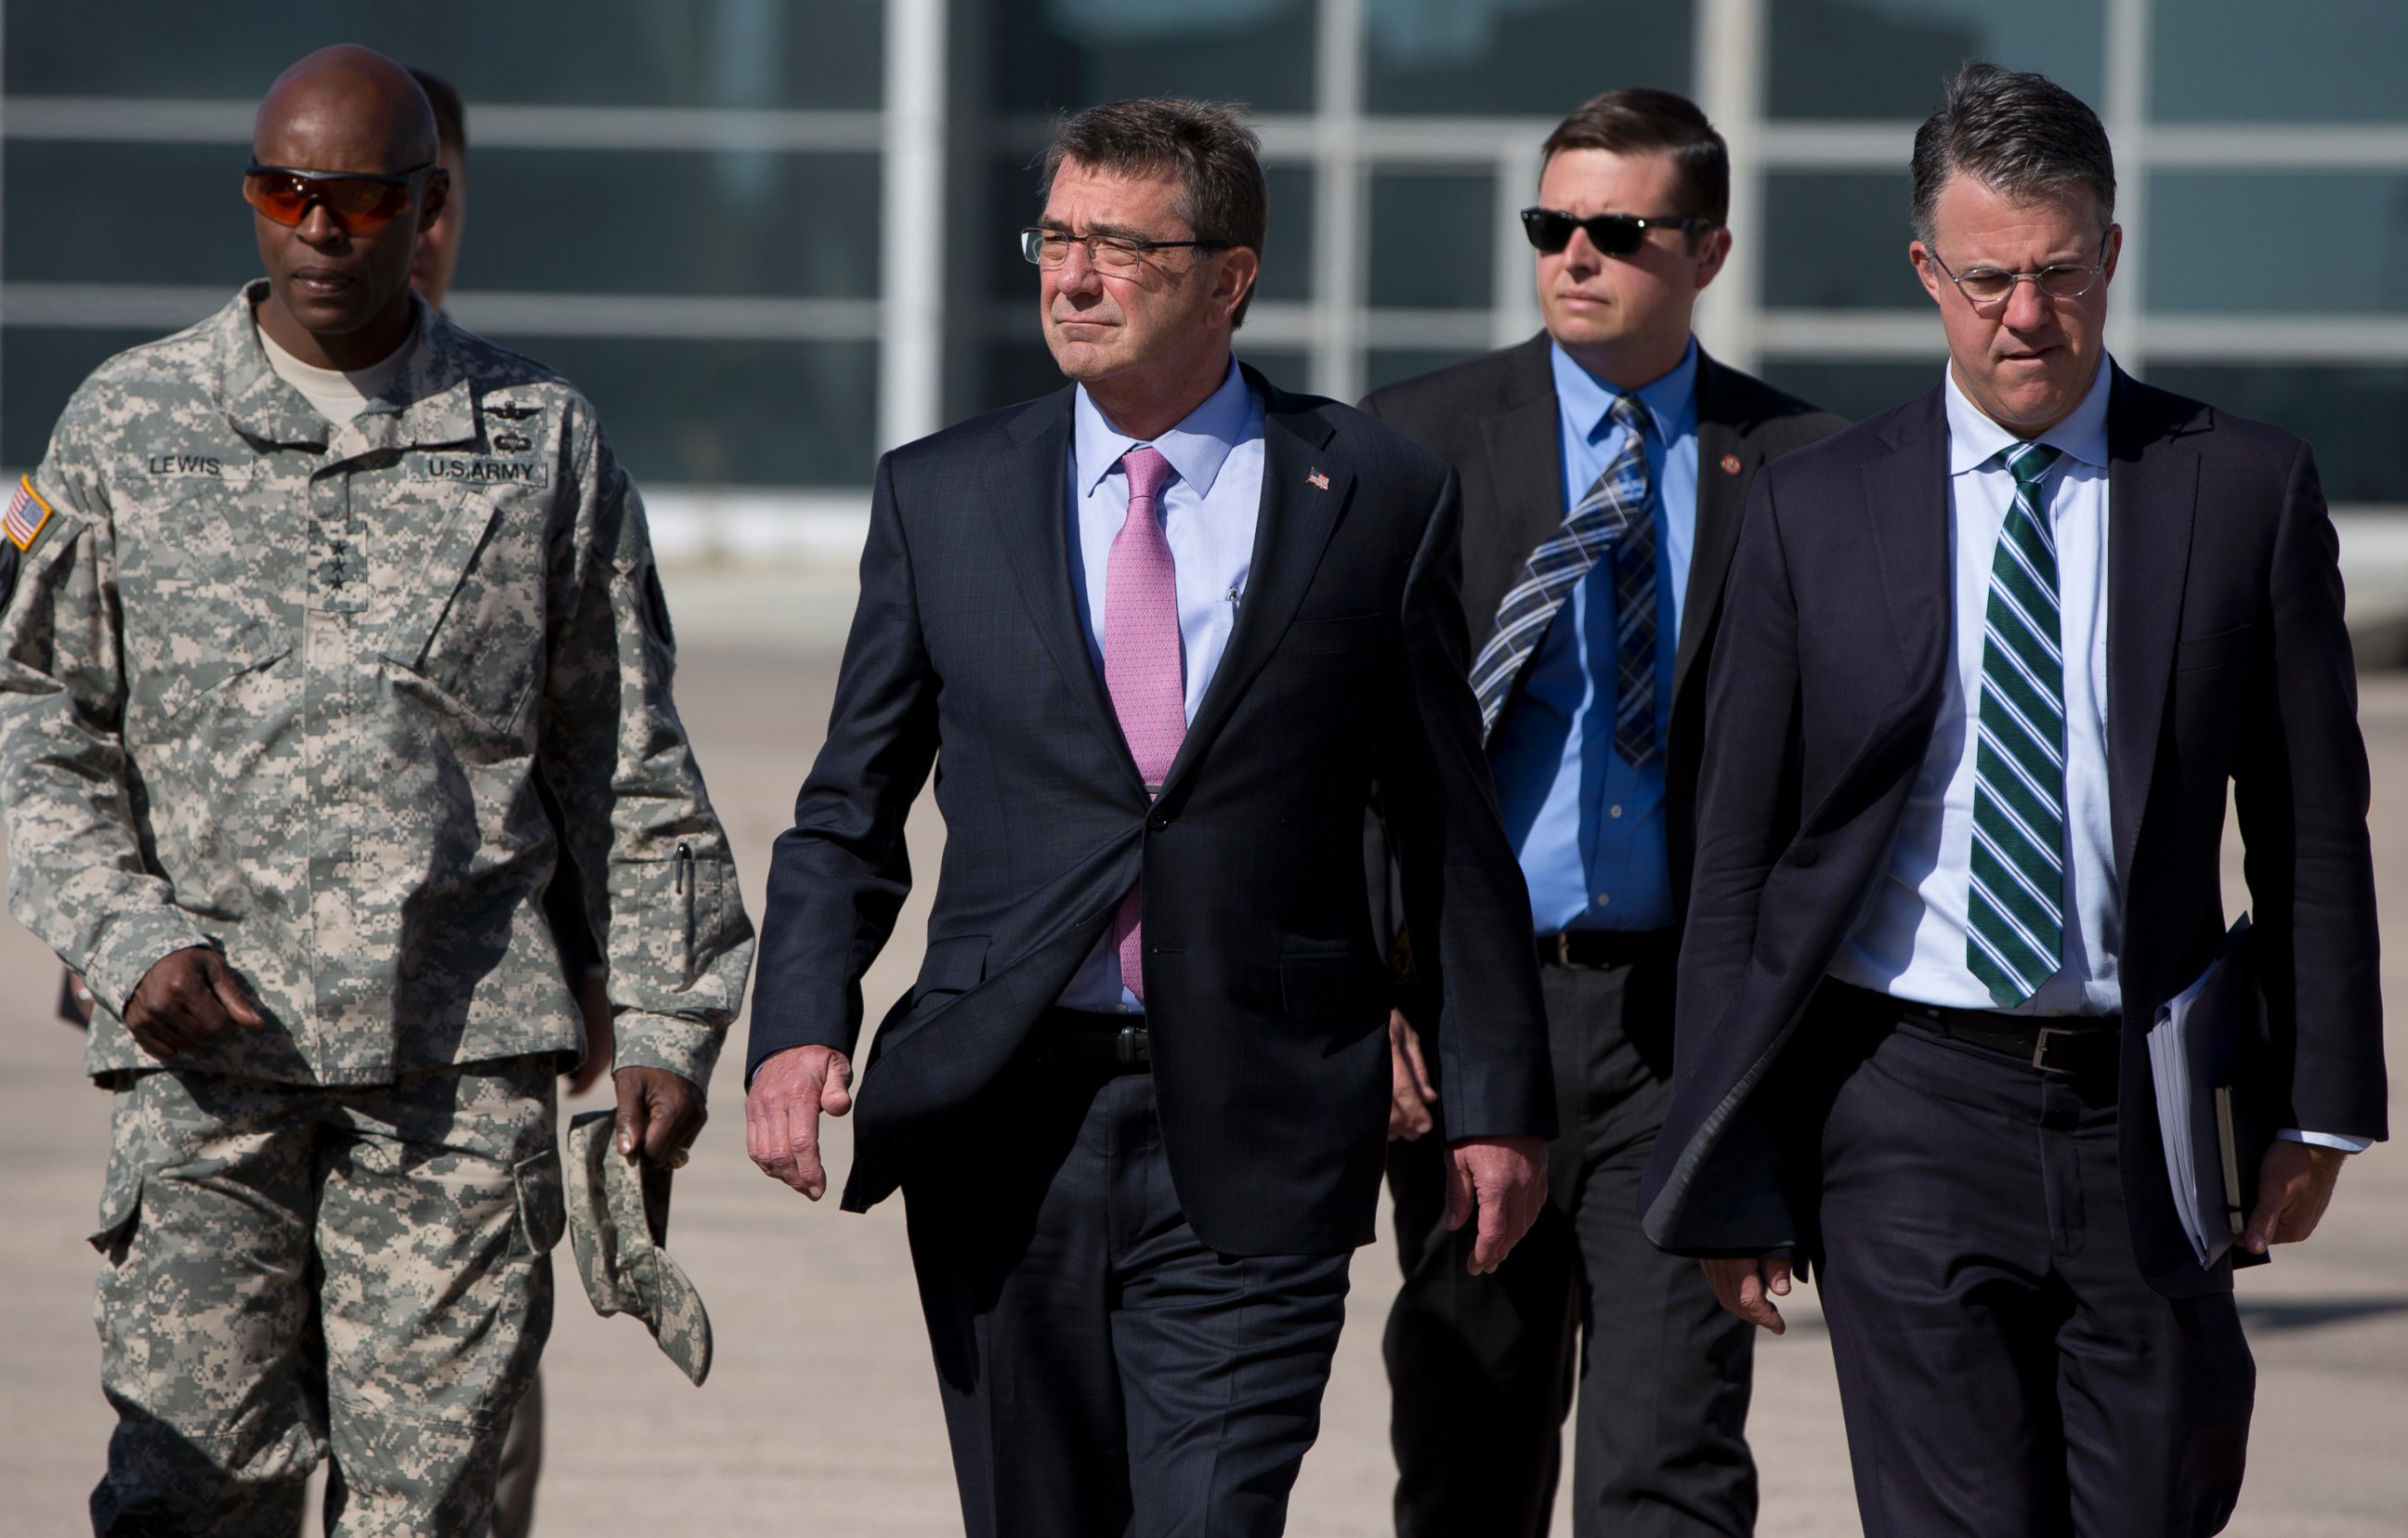 PHOTO: U.S. Defense Secretary Ash Carter, right, and U.S. Army Lt. Gen. Ron Lewis, left, walk on the tarmac before boarding a plane en route to Irbil, Iraq at Queen Alia Airport on July 24, 2015 in Amman, Jordan.